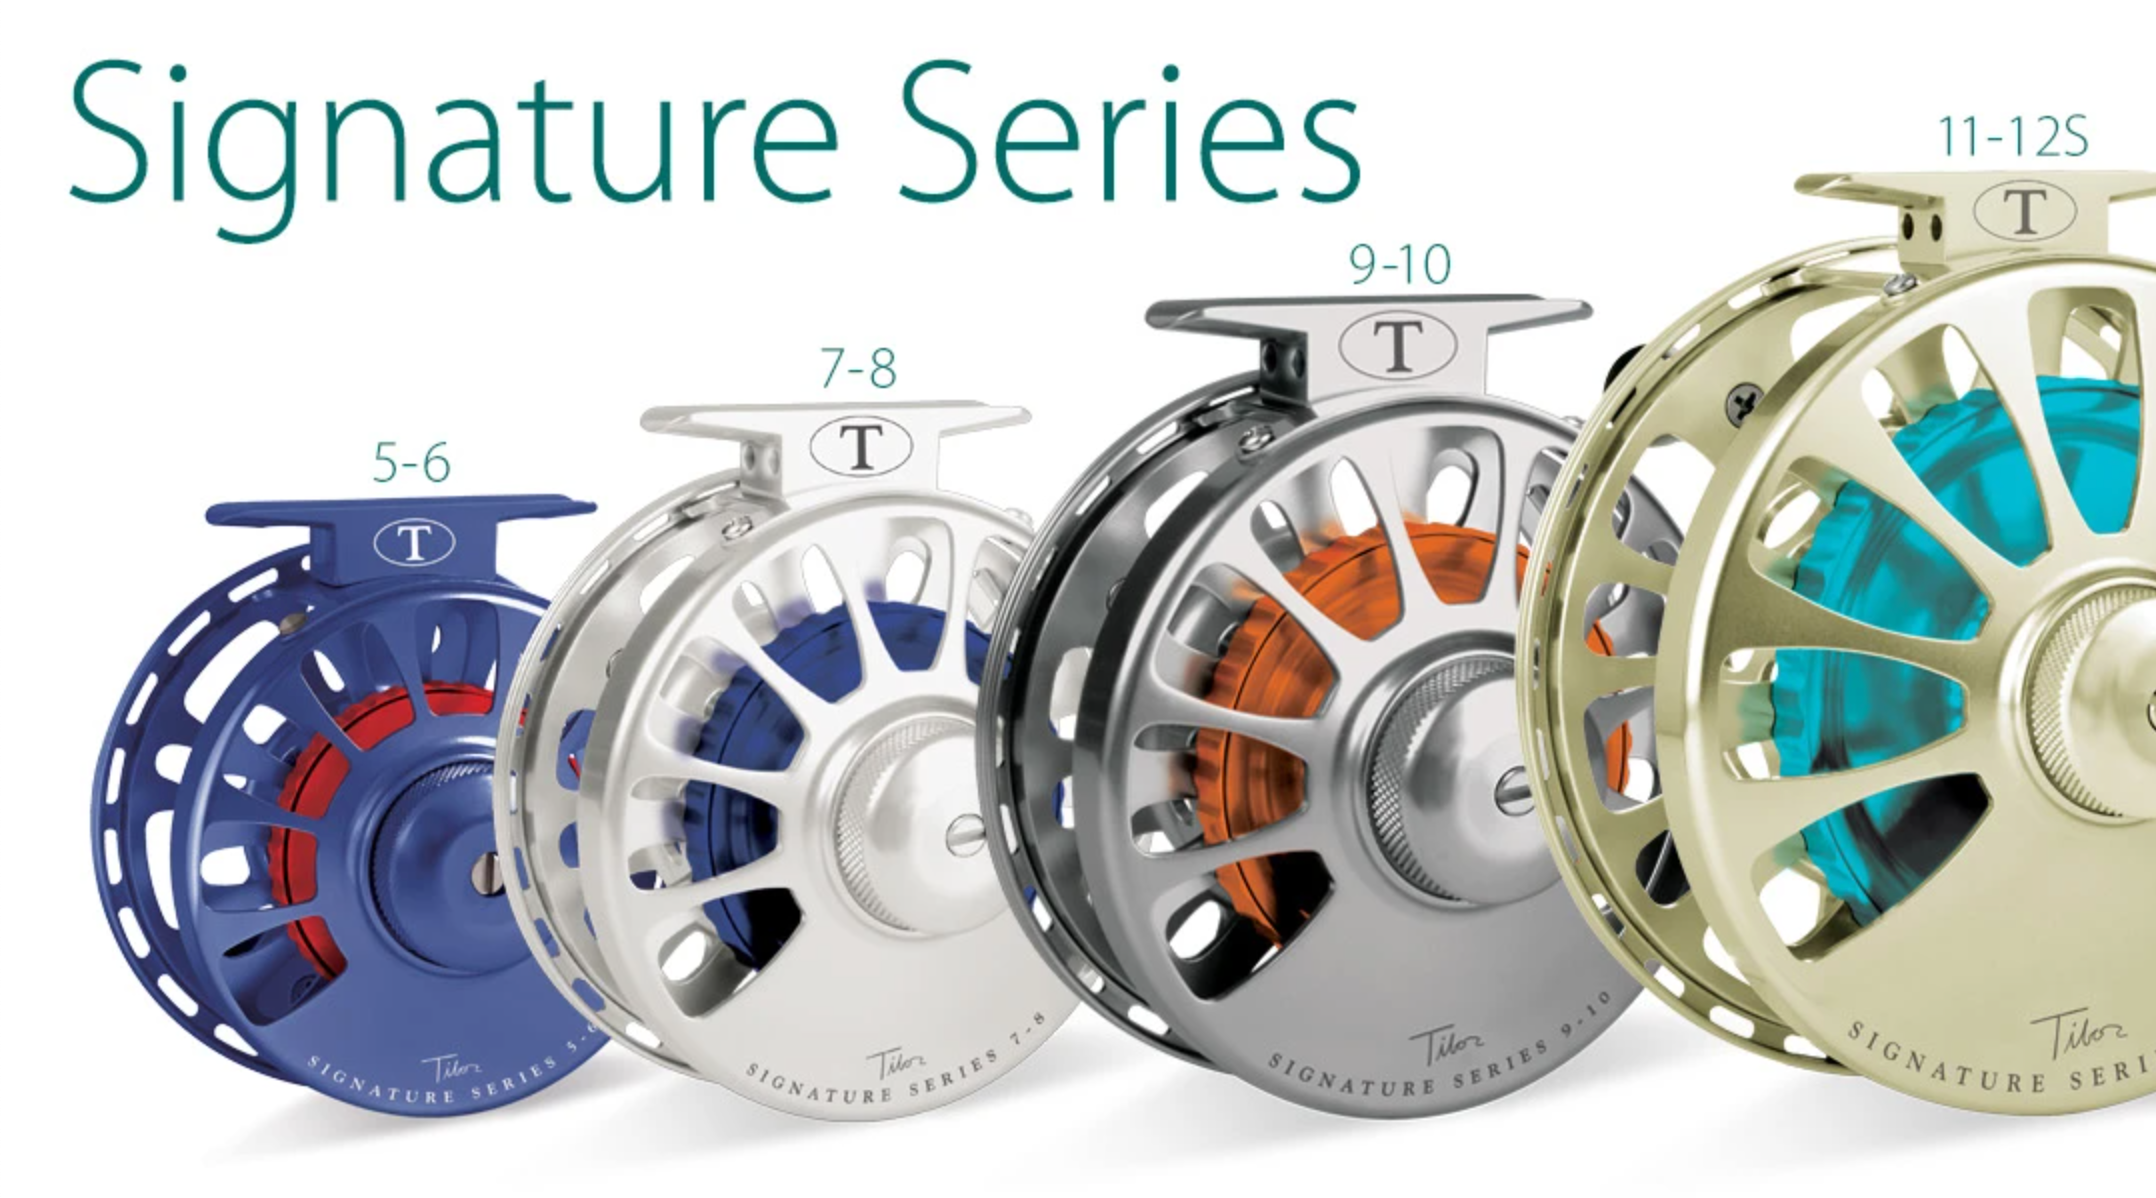 SAGE THERMO Fly Reel 10-12 WT for Big Game - Champagne - NEW!